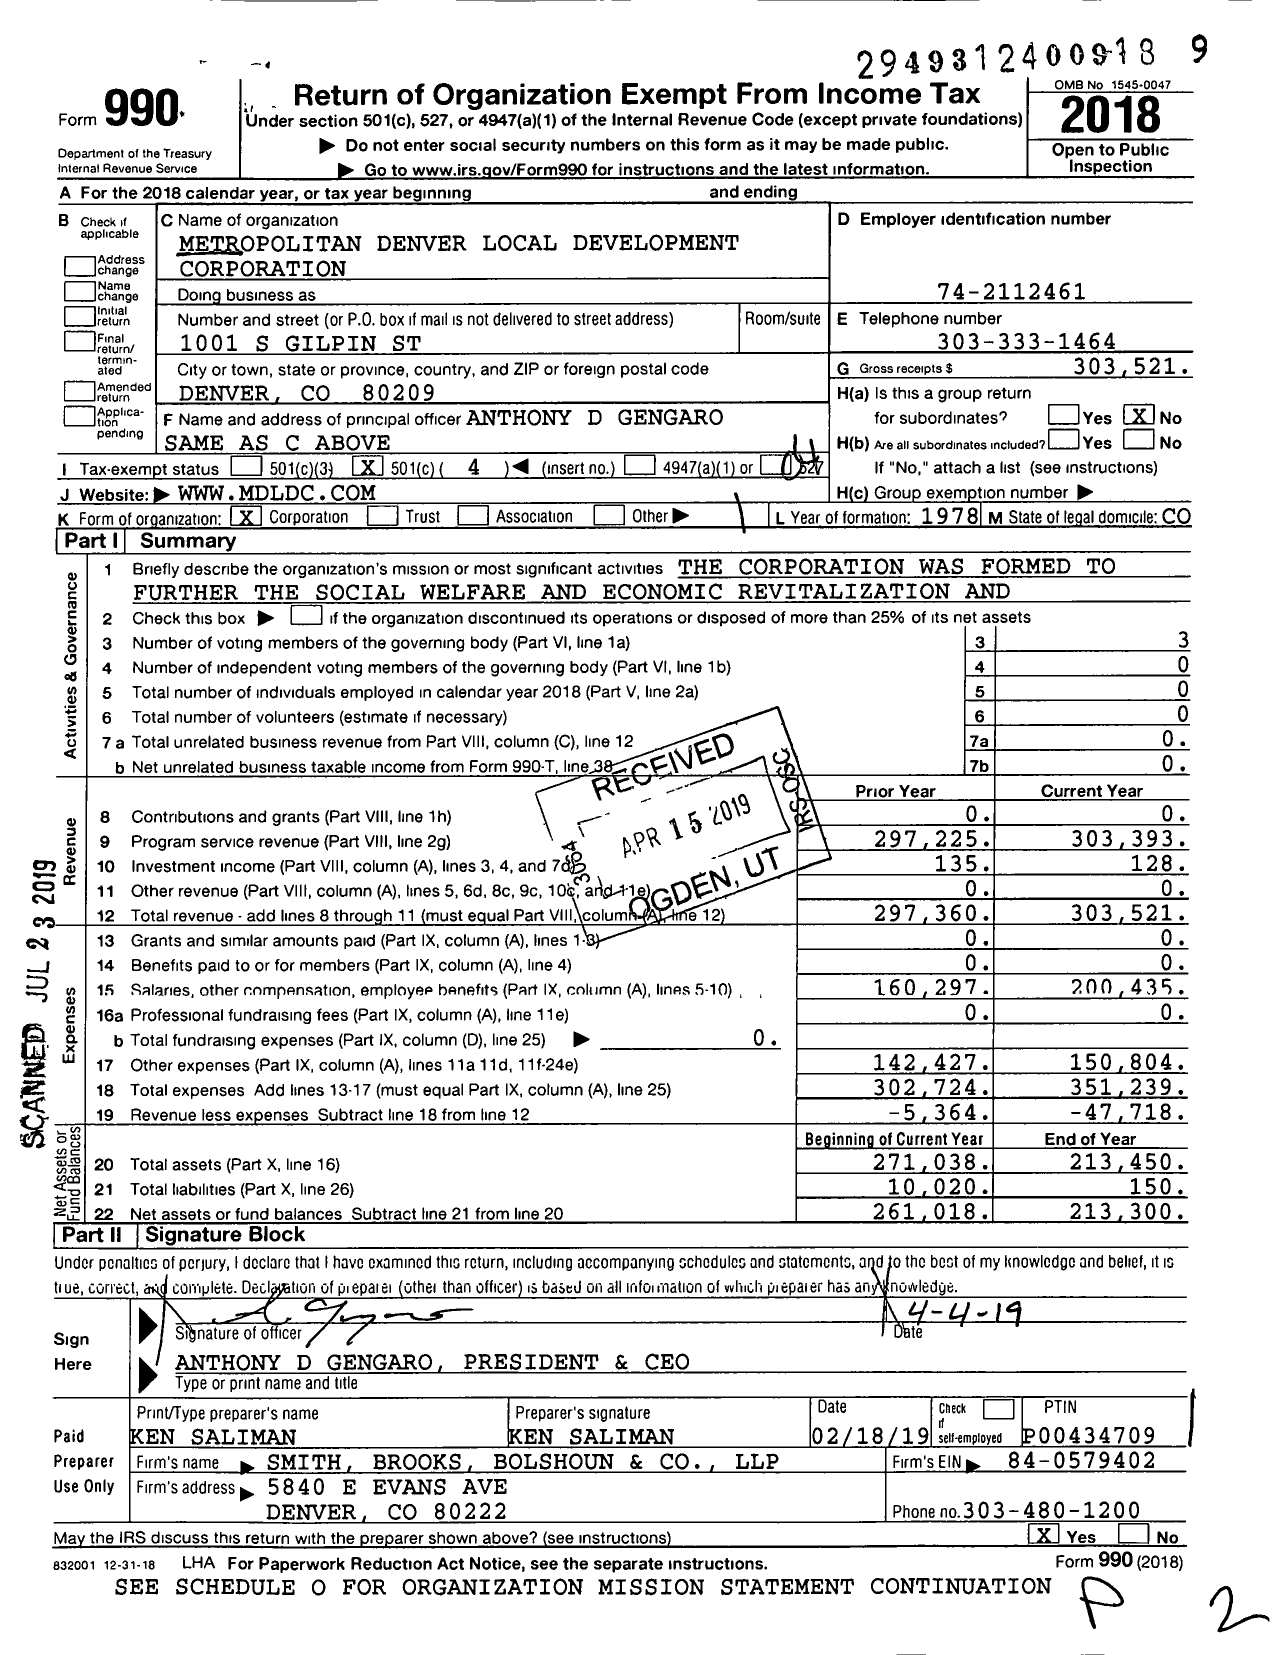 Image of first page of 2018 Form 990O for Metropolitan Denver Local Development Corporation